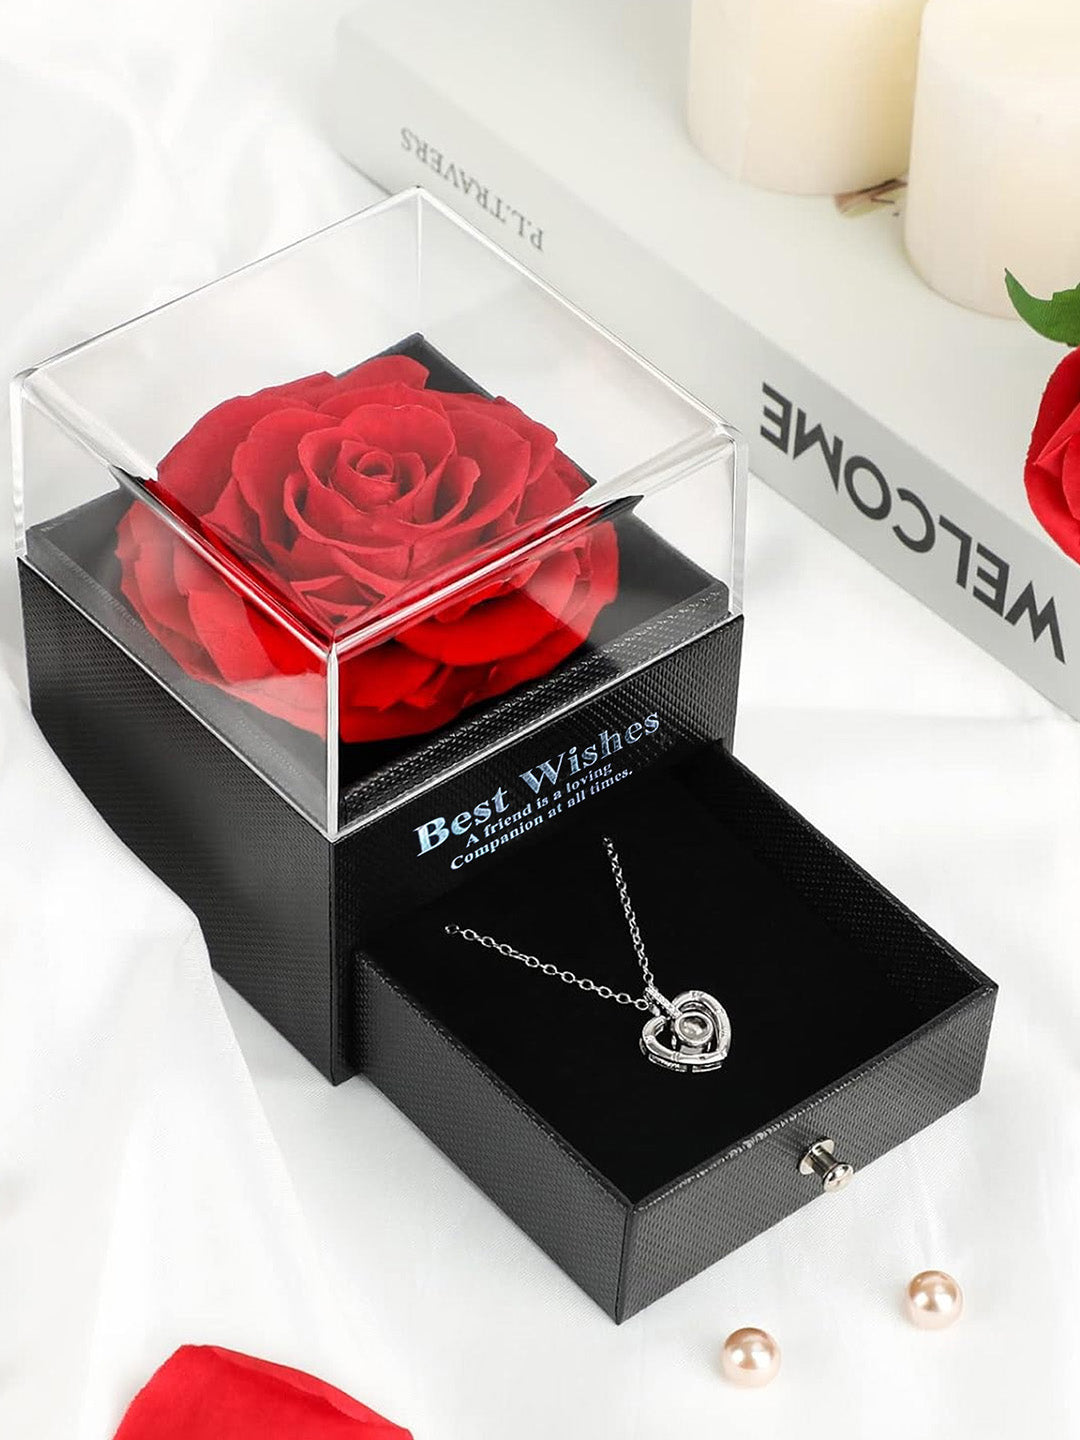 Top 6 Valentine's Day Gifts Ideas for New Girlfriend | KeralaGifts.in Blog